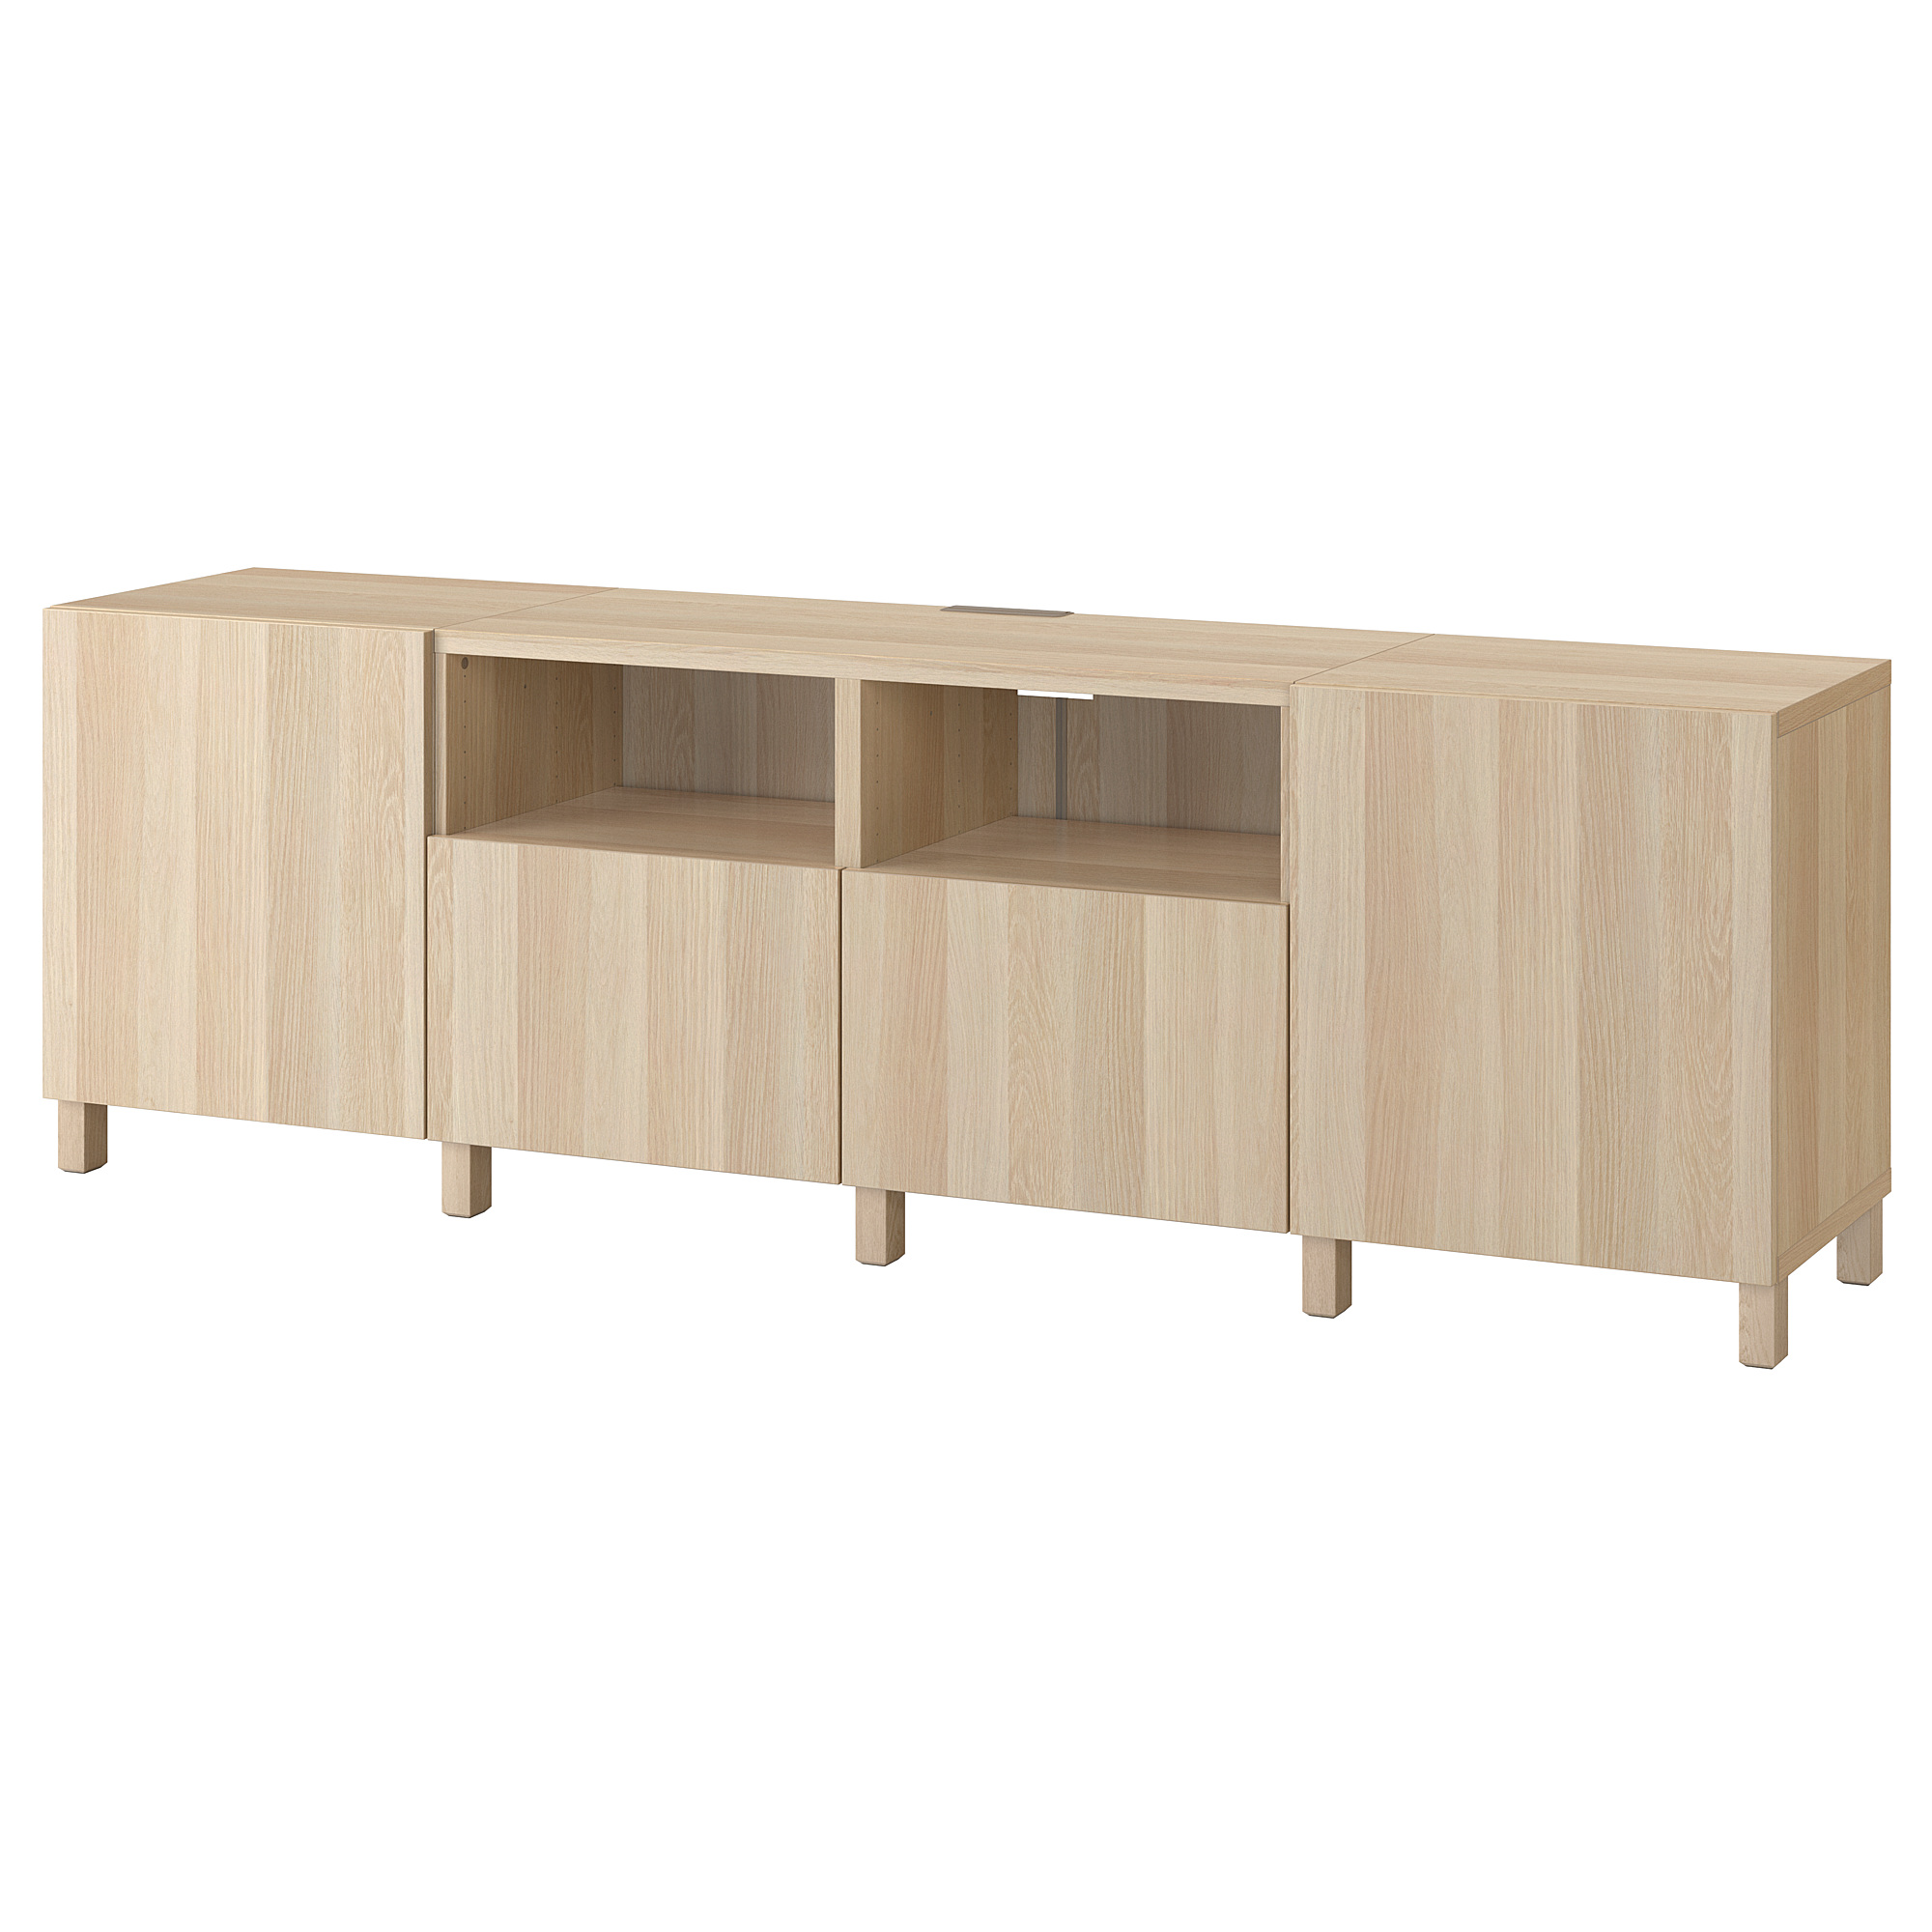 BESTÅ TV bench with doors and drawers